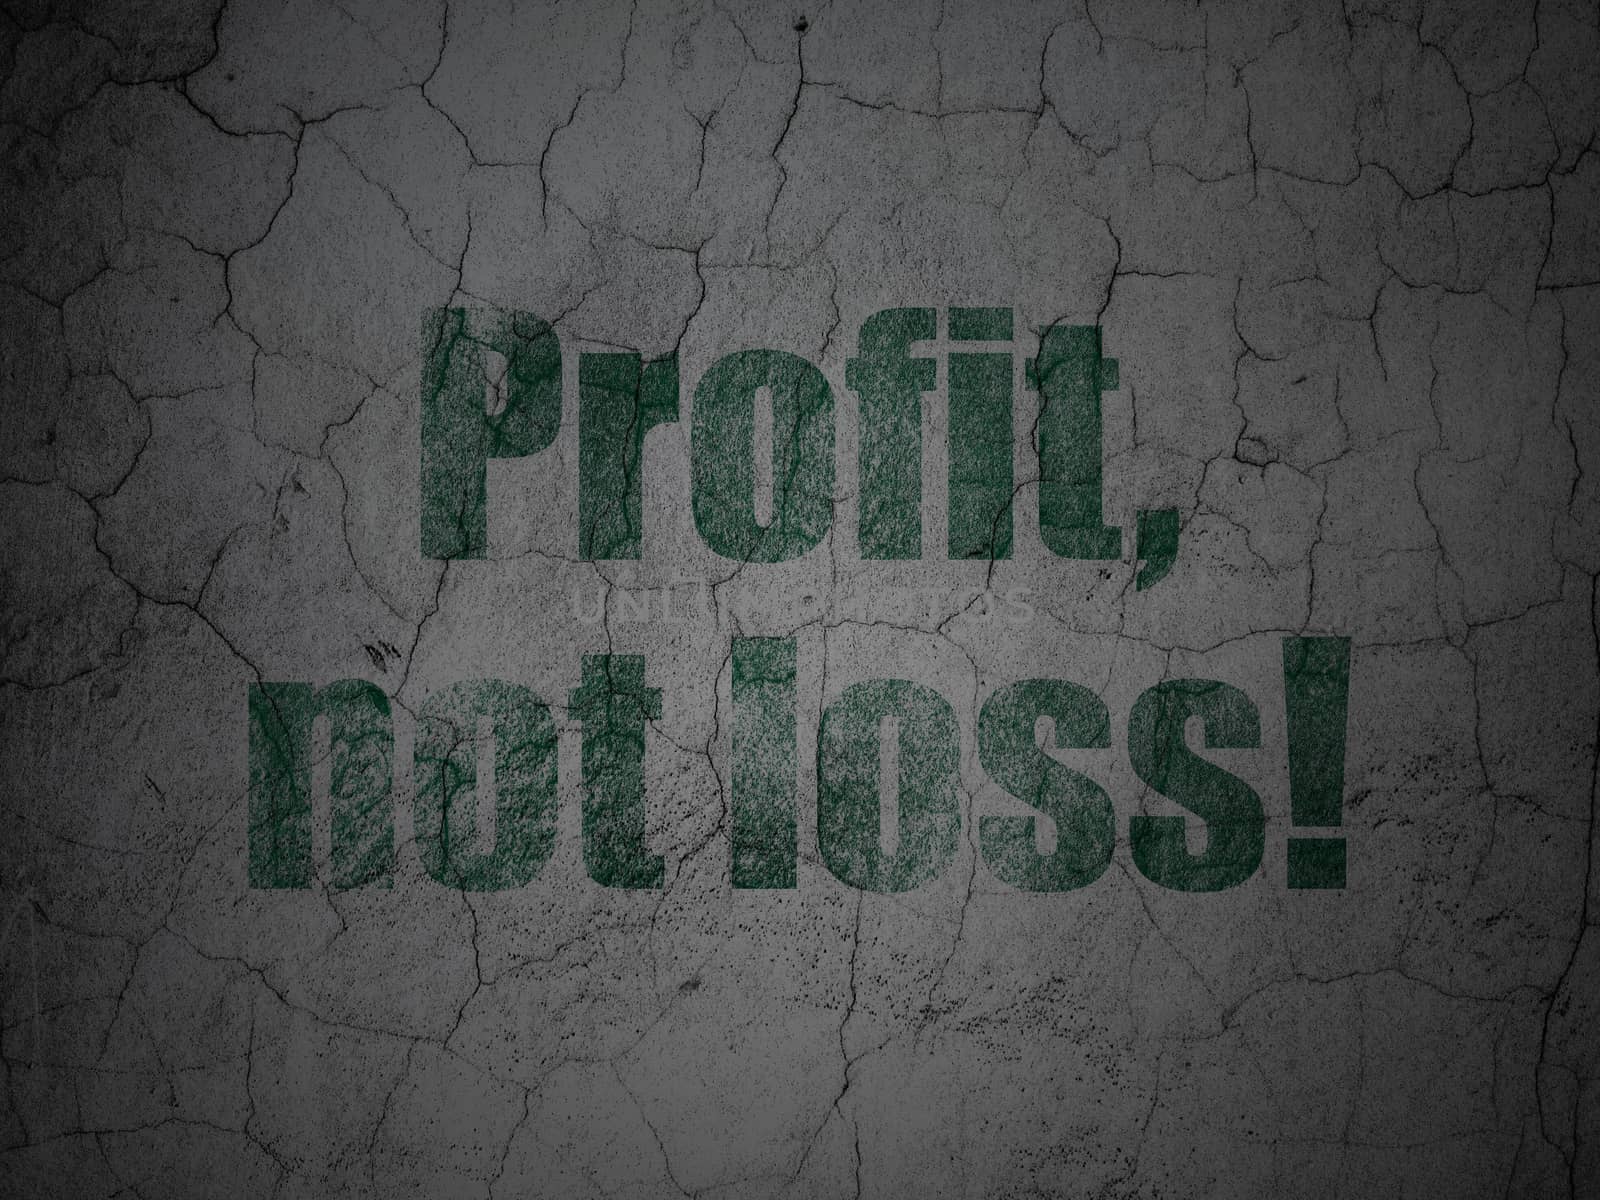 Finance concept: Green Profit, Not Loss! on grunge textured concrete wall background